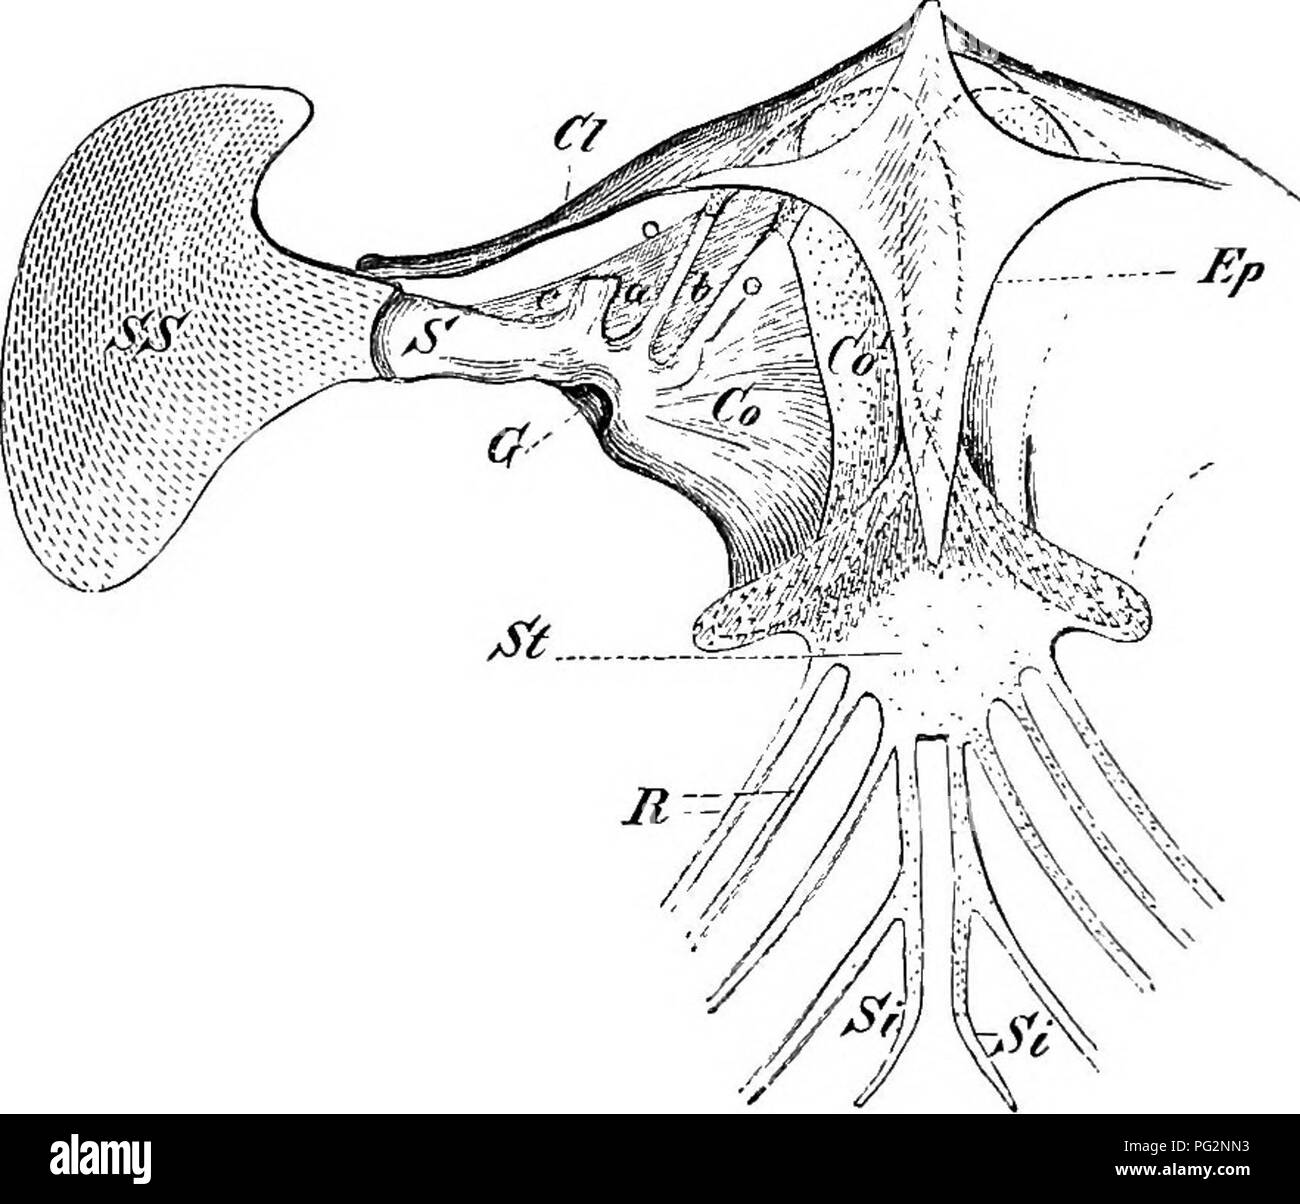 . Elements of the comparative anatomy of vertebrates. Anatomy, Comparative. 60 COMPARATIVE ANATOMY ing to differentiations of the pectoral arch/ but as consisting of skeletal parts which primarily belong to the body-wall, and only secondarily come into connection with the limb-skeleton. In most Urodeles and certain Anurans the edges of the cartilag- inous sternum are inserted into the grooved median margins of the two coracoids (Fig. 43, B, C), to which they are united by connective tissue. In Rana, on the other hand (D), in which the two halves of the pectoral arch are much moi'e closely conn Stock Photo